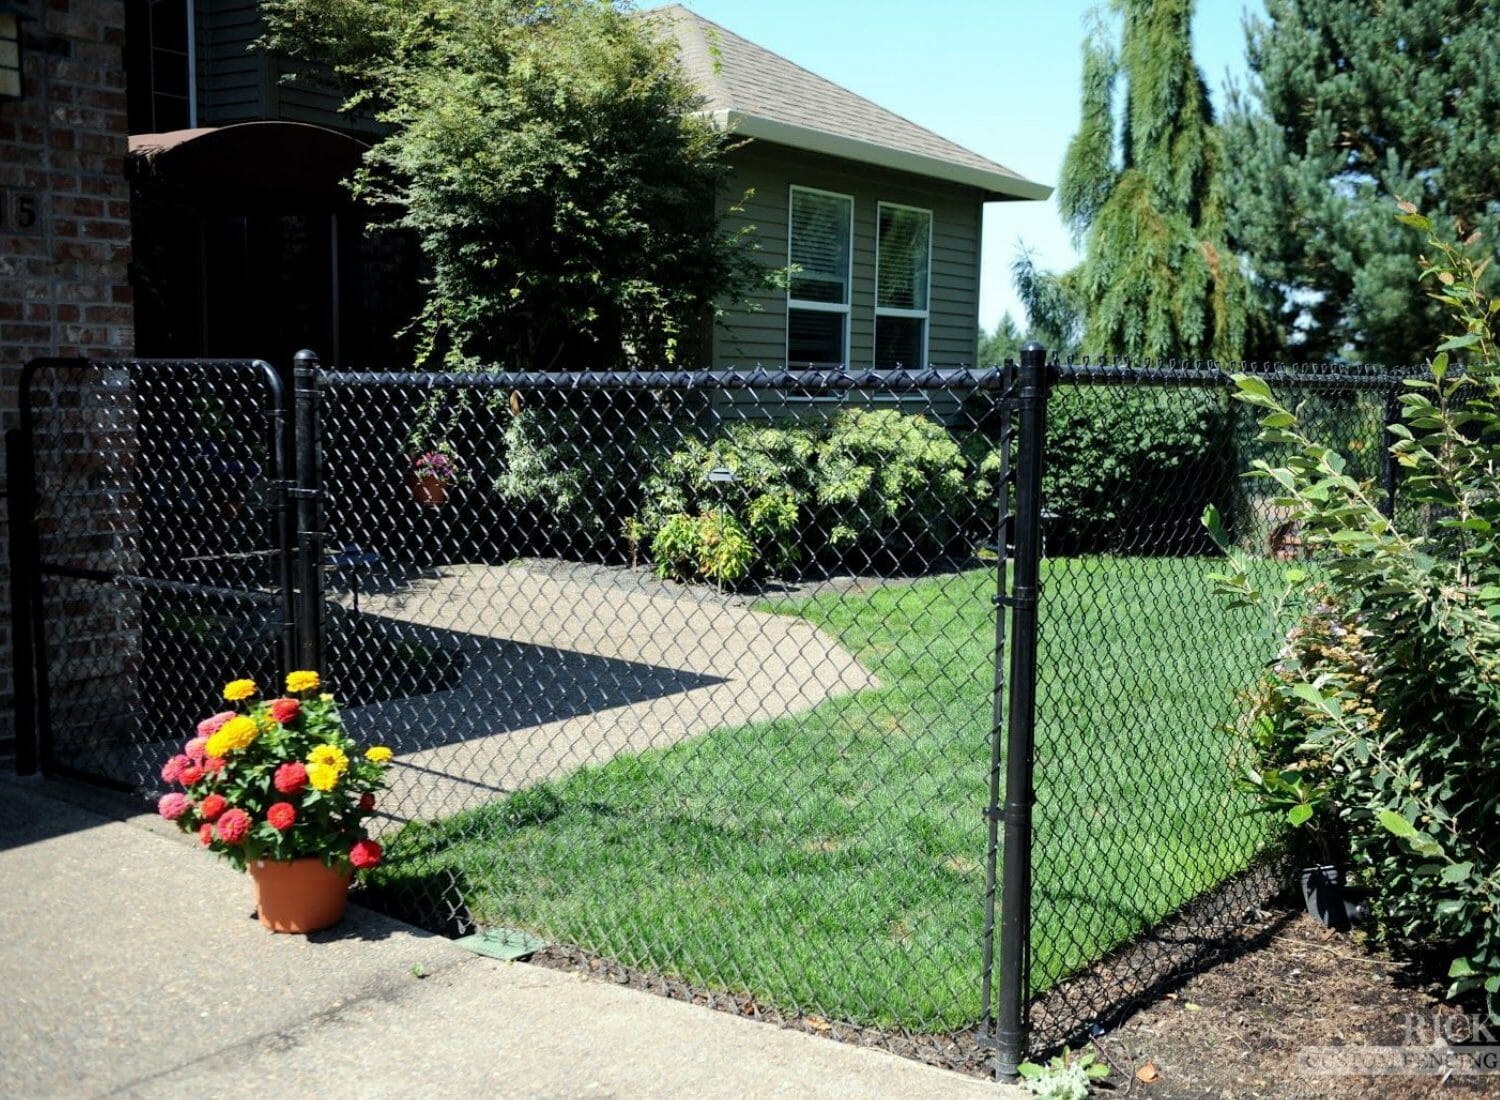 3 foot Chain Link Fence Cost per Linear Foot